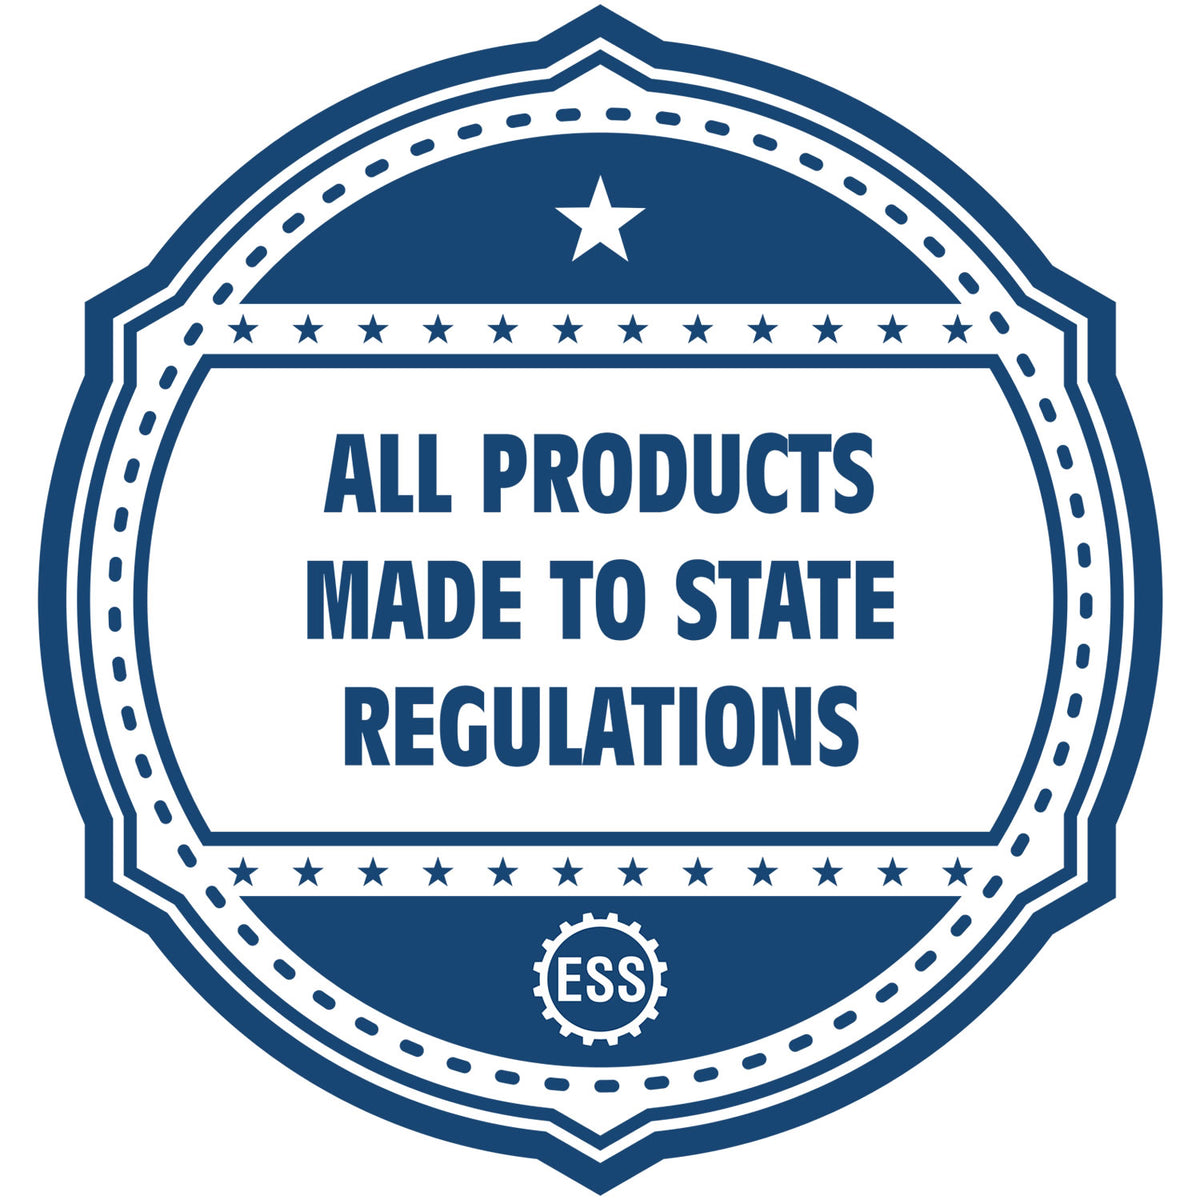 An icon or badge element for the Handheld Delaware Professional Engineer Embosser showing that this product is made in compliance with state regulations.